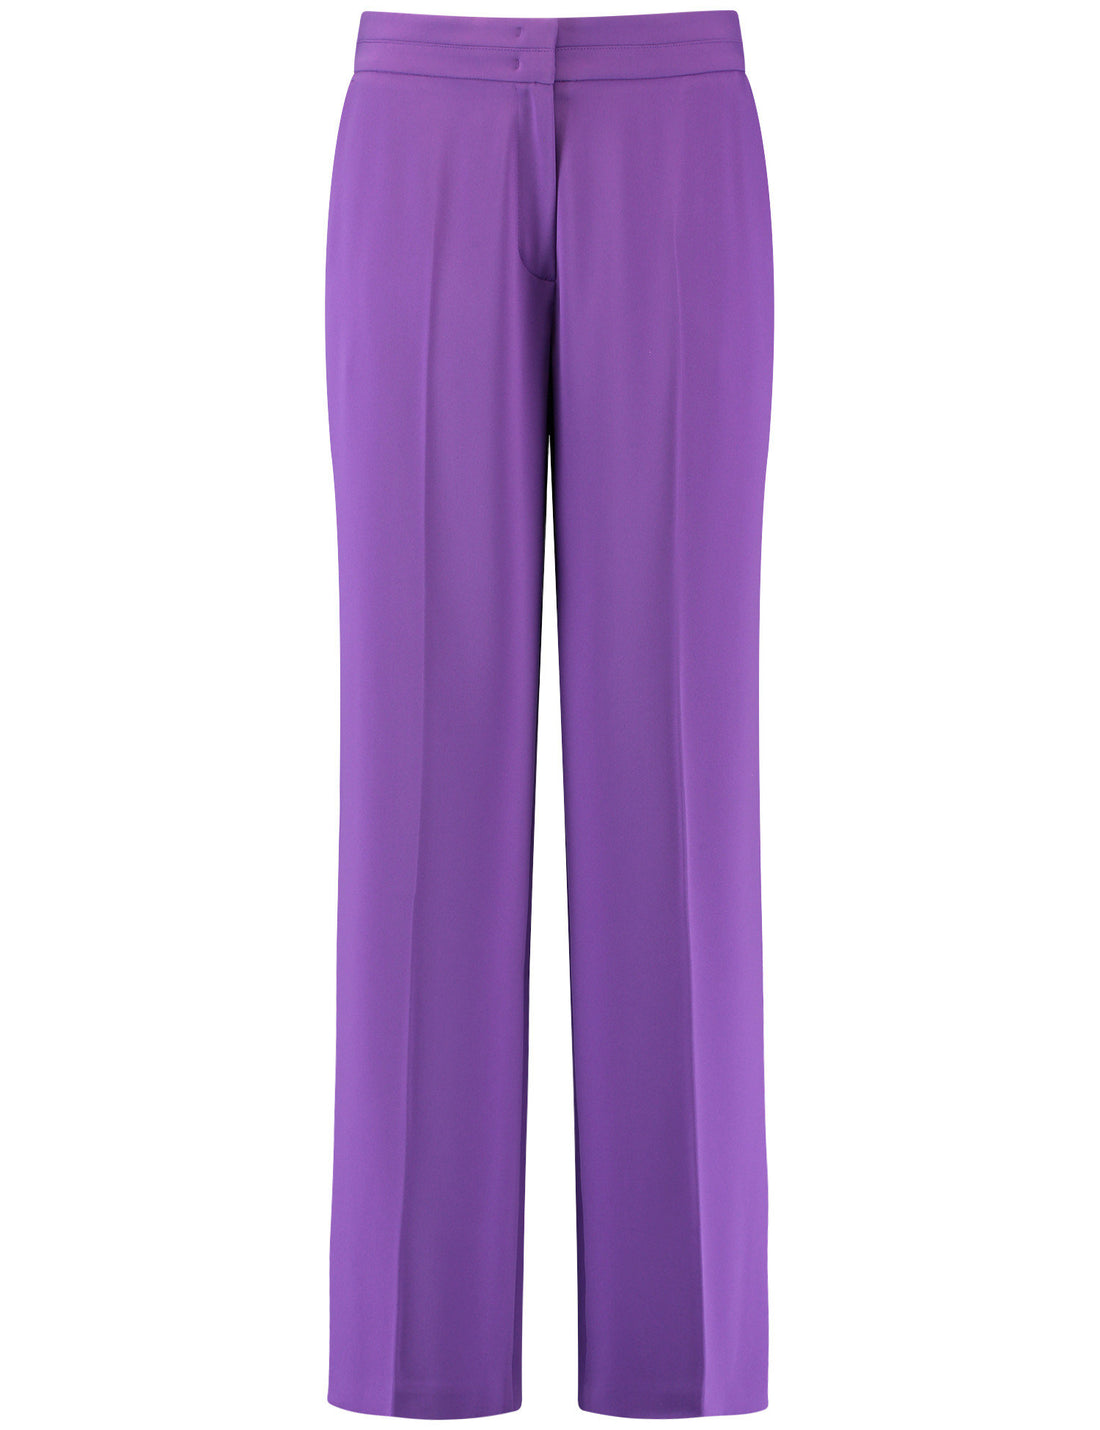 Flowing Trousers With Pressed Pleats_220002-31222_30904_01